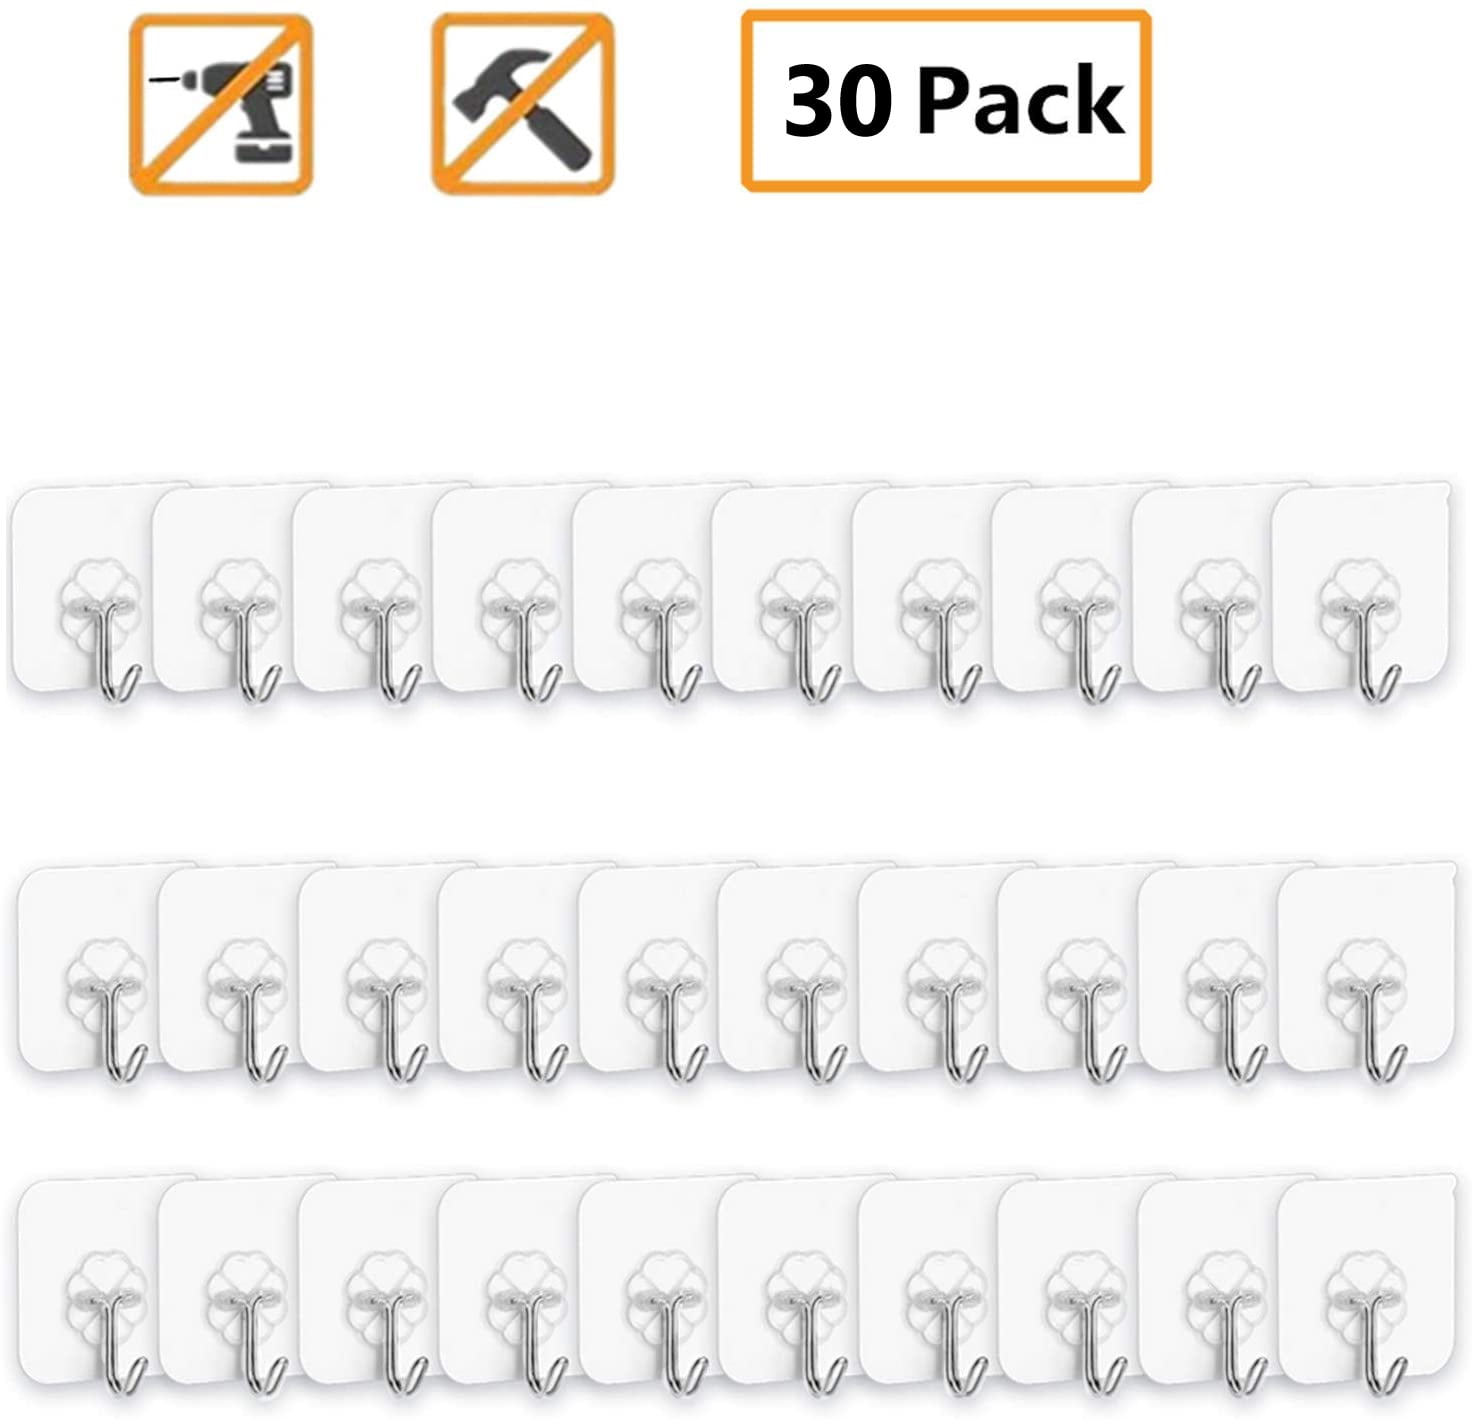 Details about   24pcs Adhesive Sticky Hooks Transparent Wall Seamless Hook Bathroom Hangers USA 